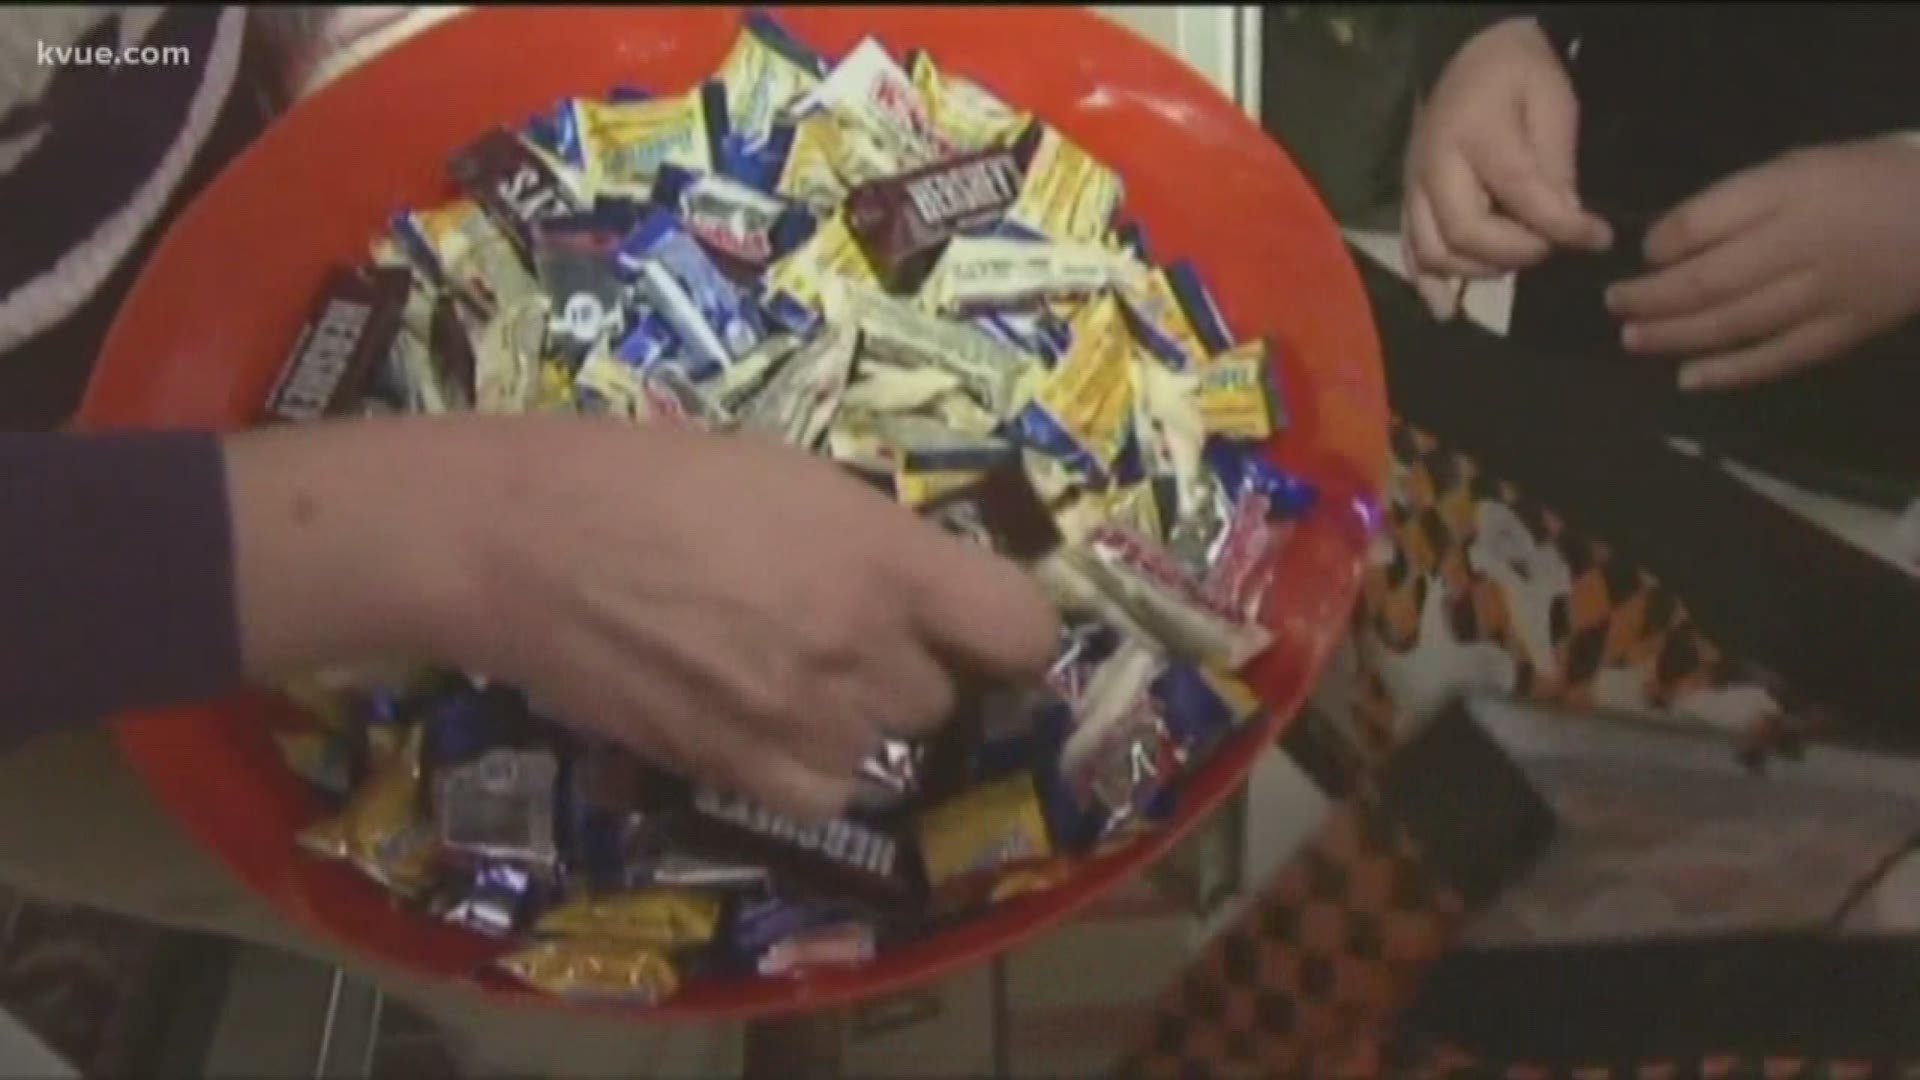 You can get a great costume and all the Halloween candy without breaking the bank. Carlos Villalobos from your Better Business Bureau is at KVUE to tell us how.